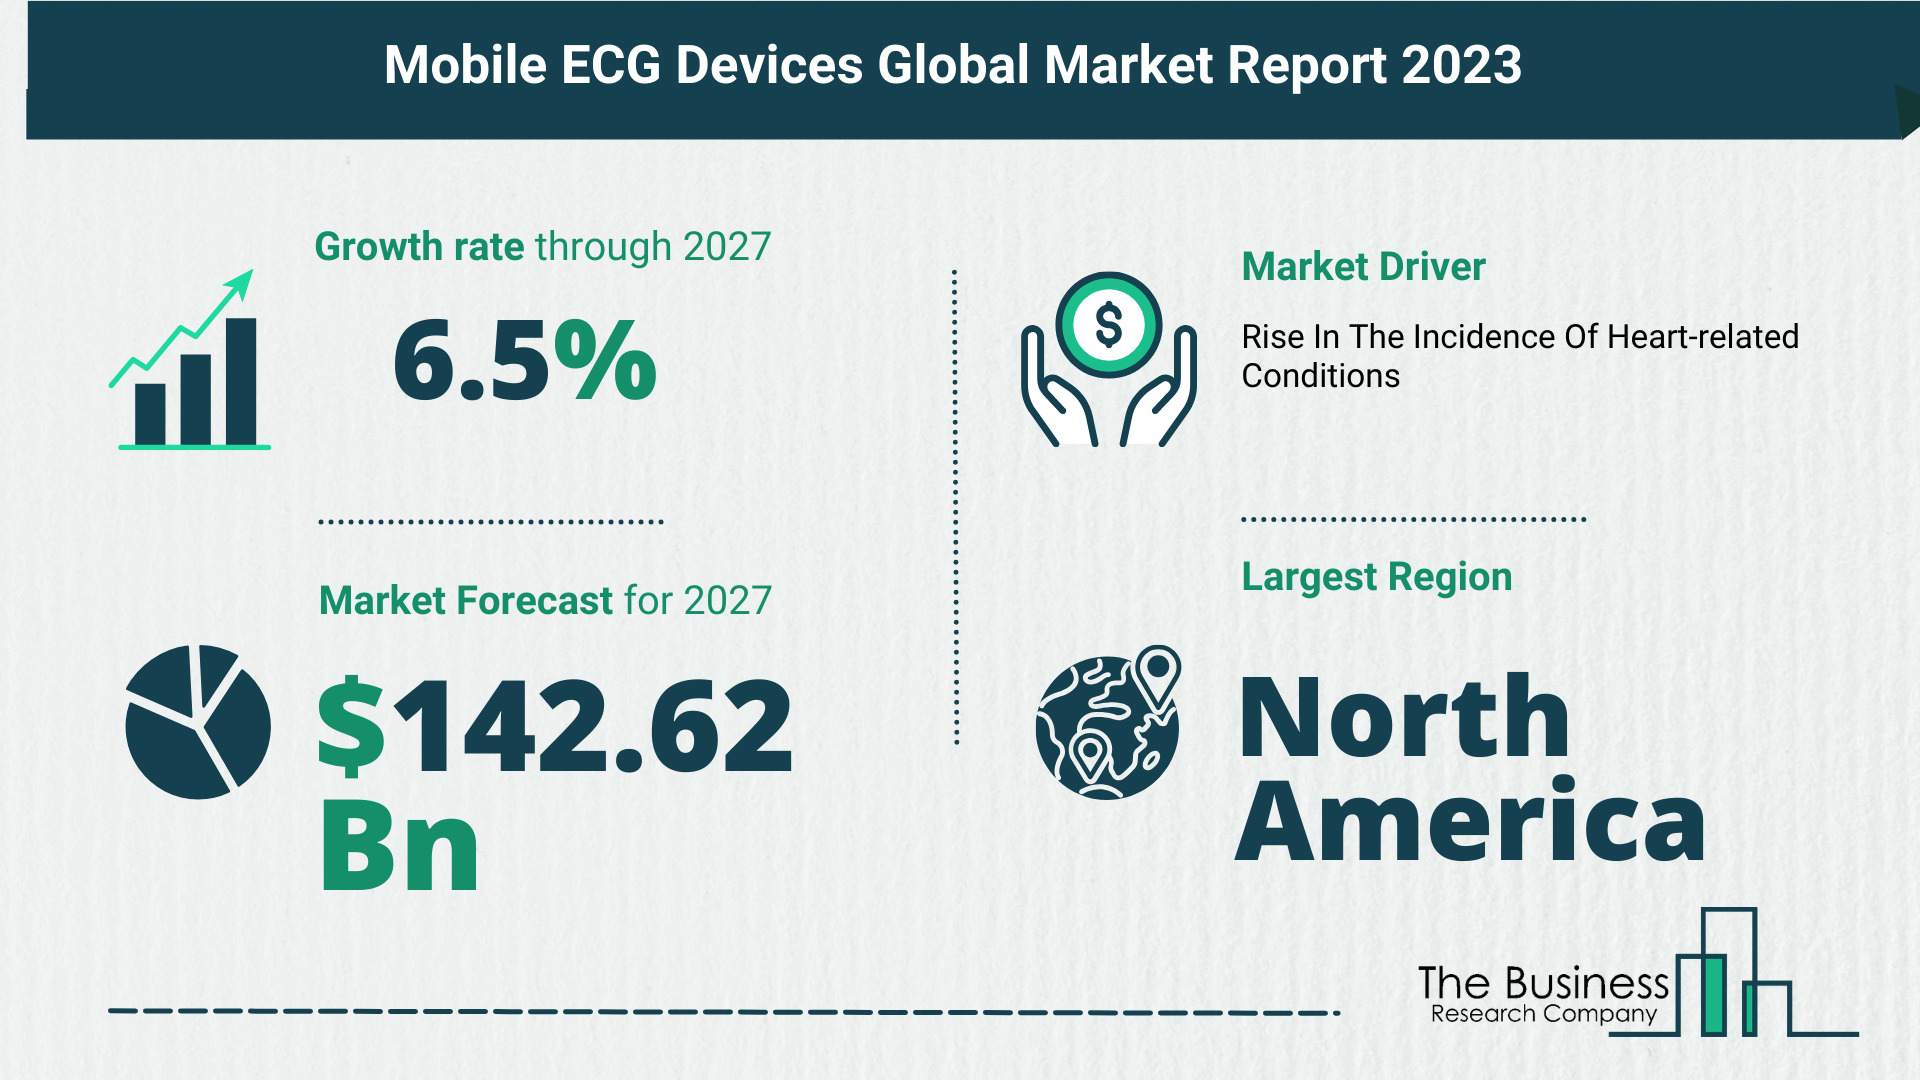 Global Mobile ECG Devices Market